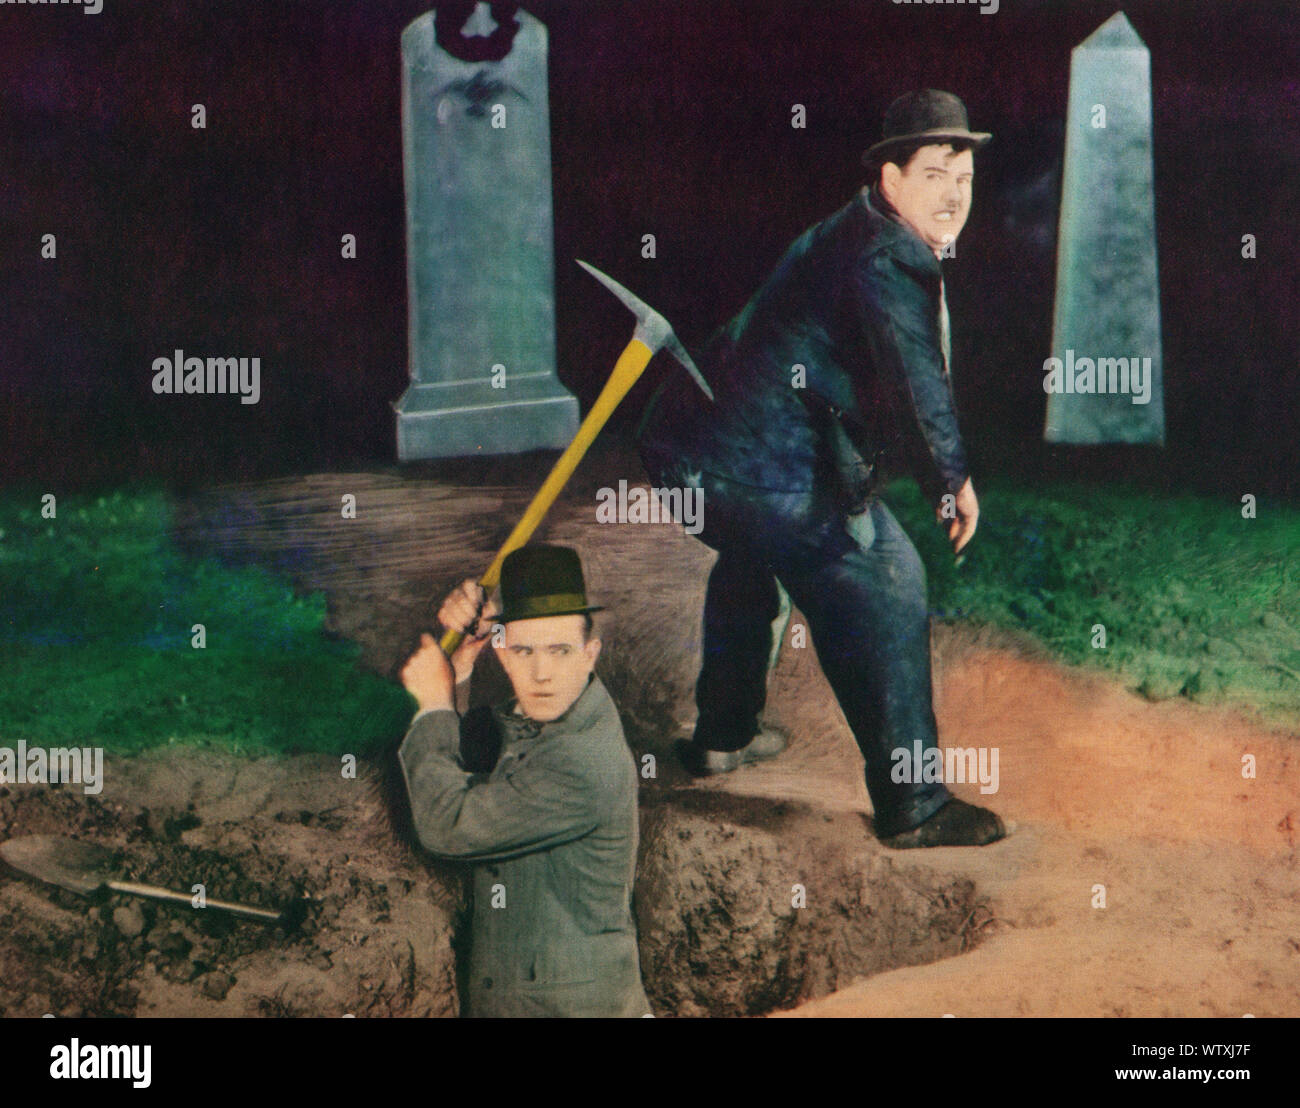 The Further Perils of Laurel and Hardy, USA, 1967, Regie: Robert Youngson, Darsteller: Stan Laurel, Oliver Hardy, Charley Chase, Szene: Graveyard Adventures Stock Photo